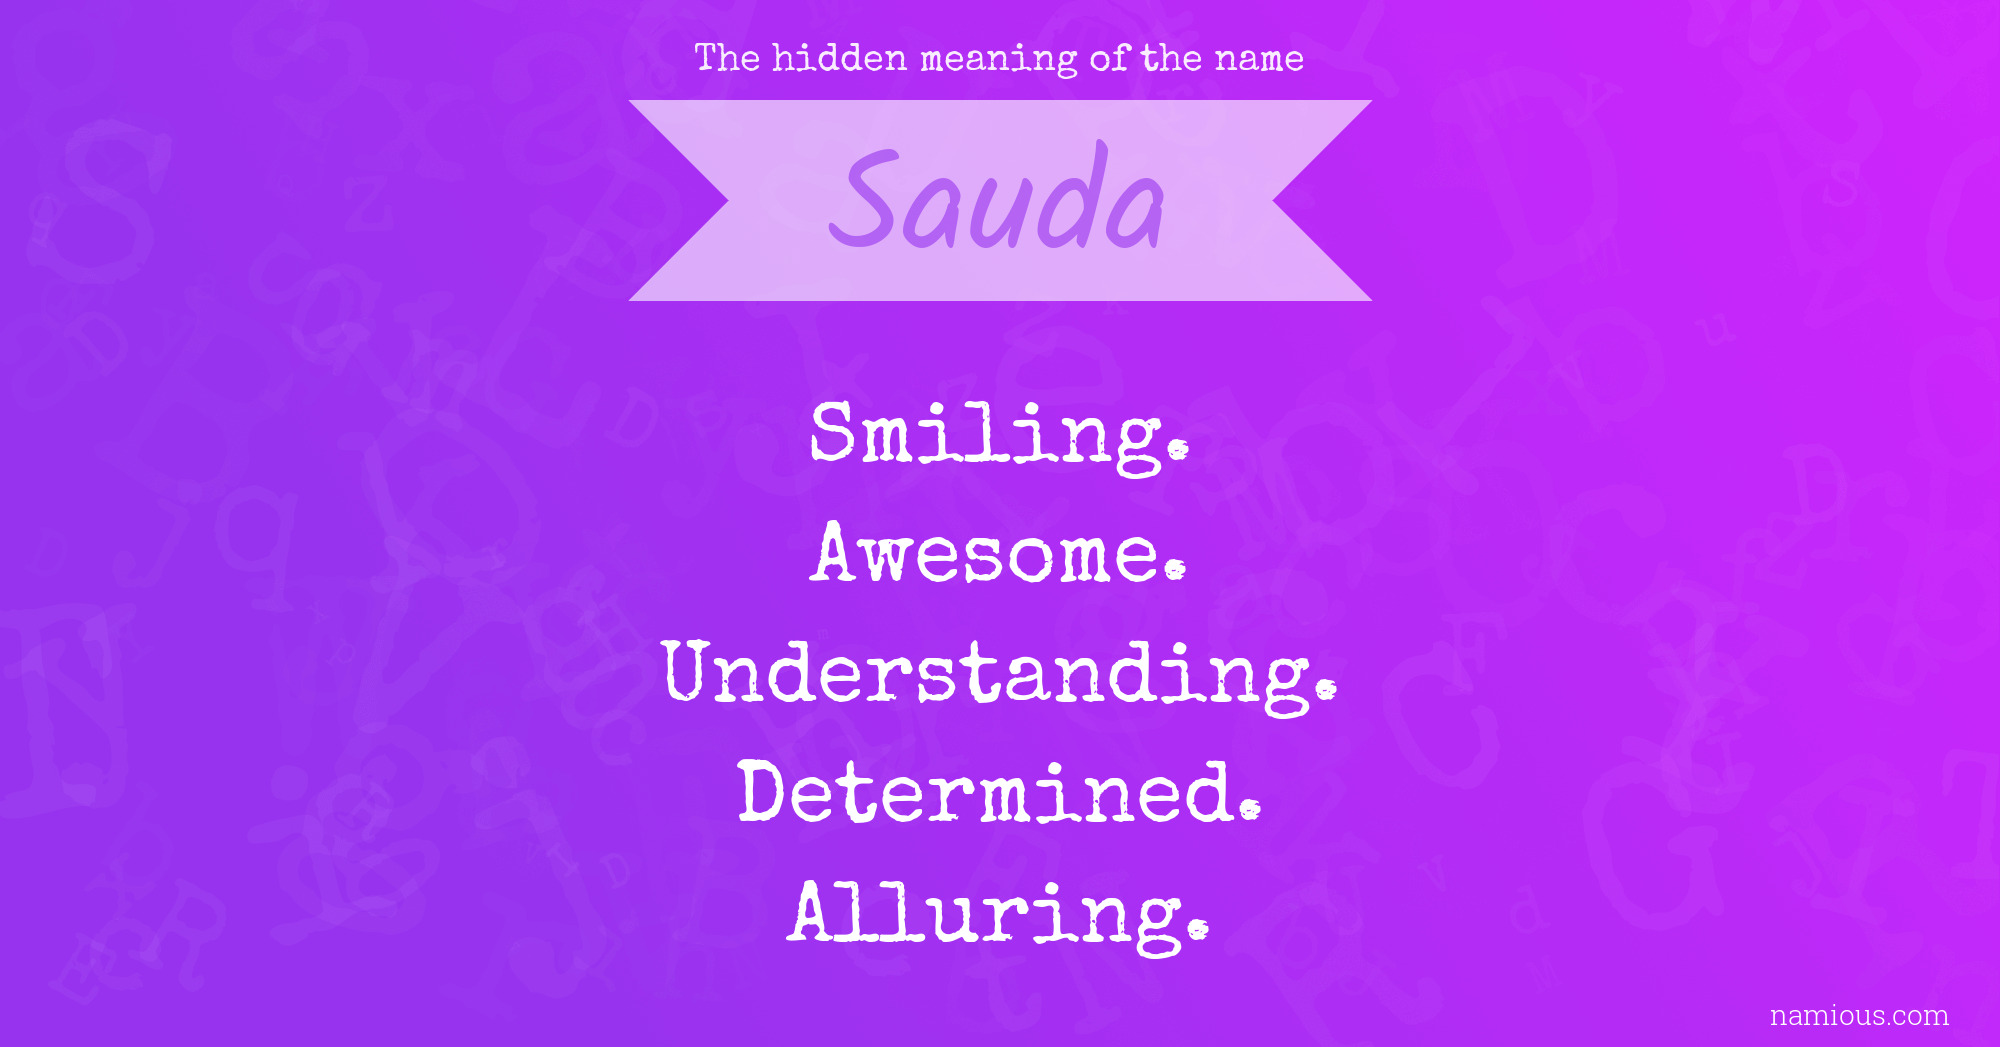 The hidden meaning of the name Sauda